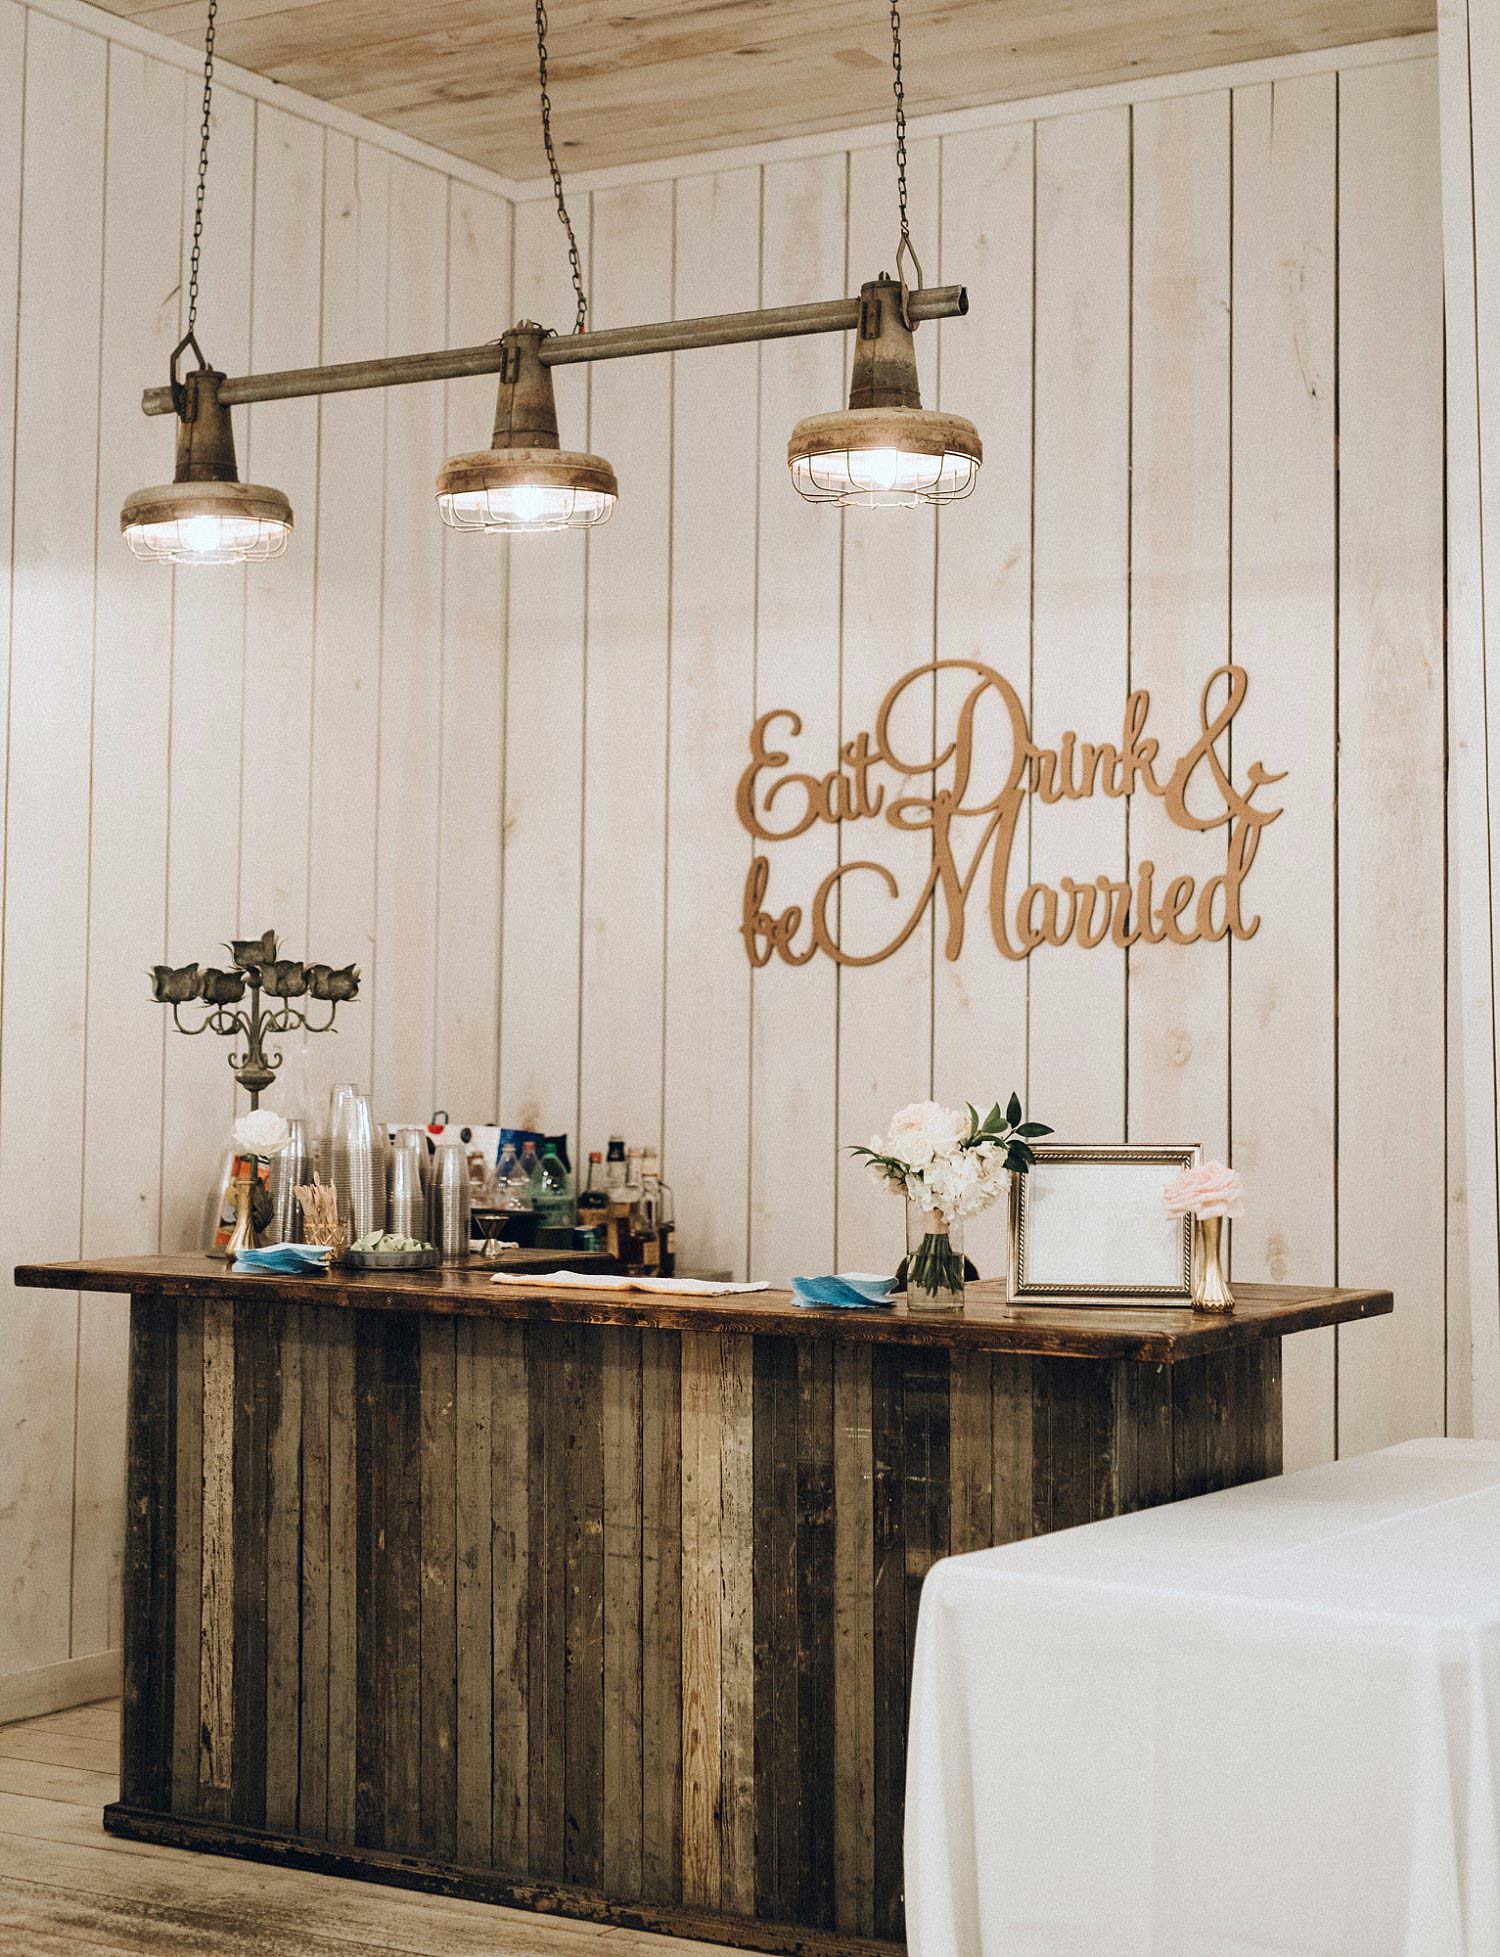 Wood bar with laser cut signage and shiplap walls